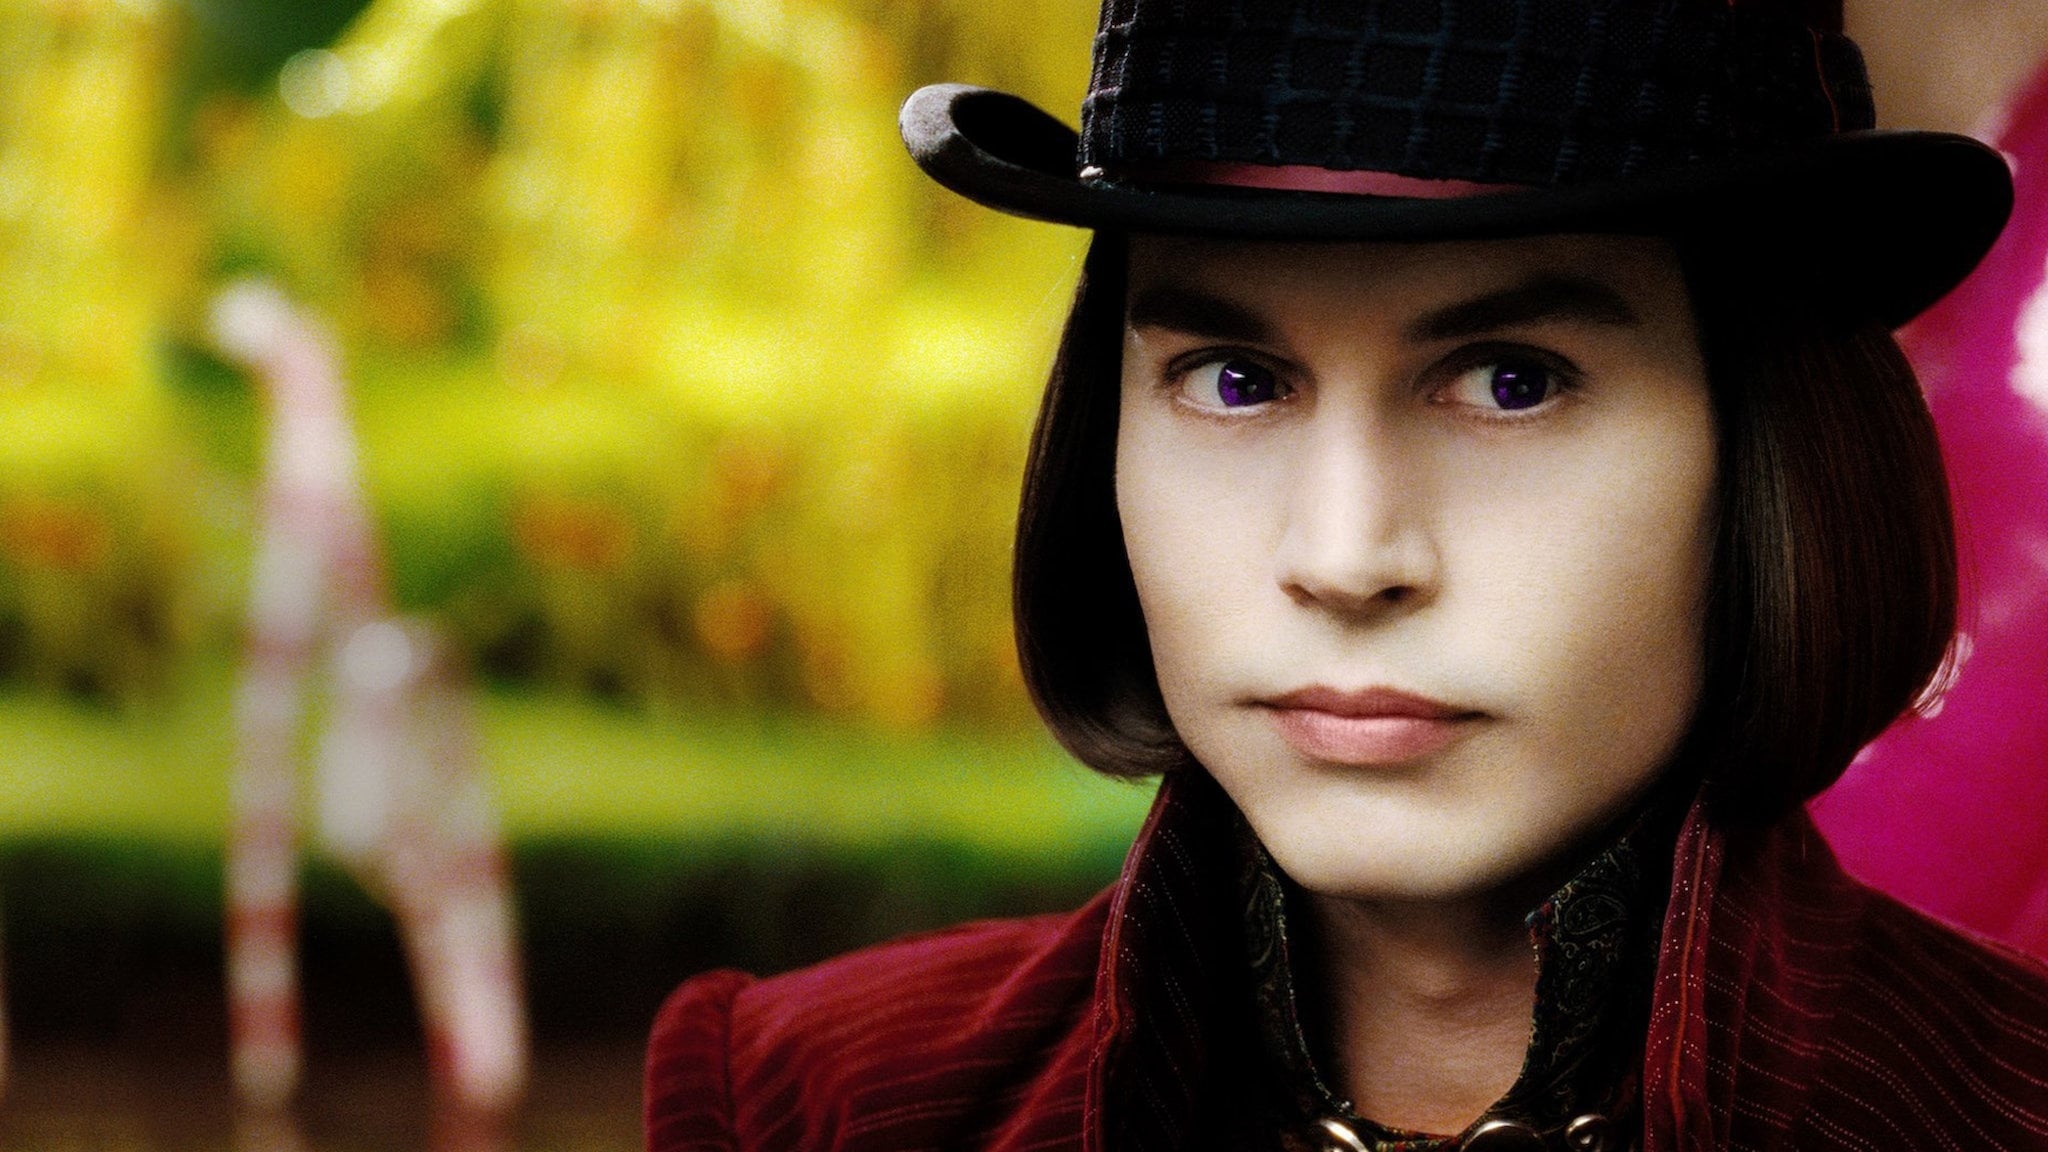 Charlie and the Chocolate Factory, Adventure comedy fantasy, Johnny Depp, Chocolate factory, 2050x1160 HD Desktop